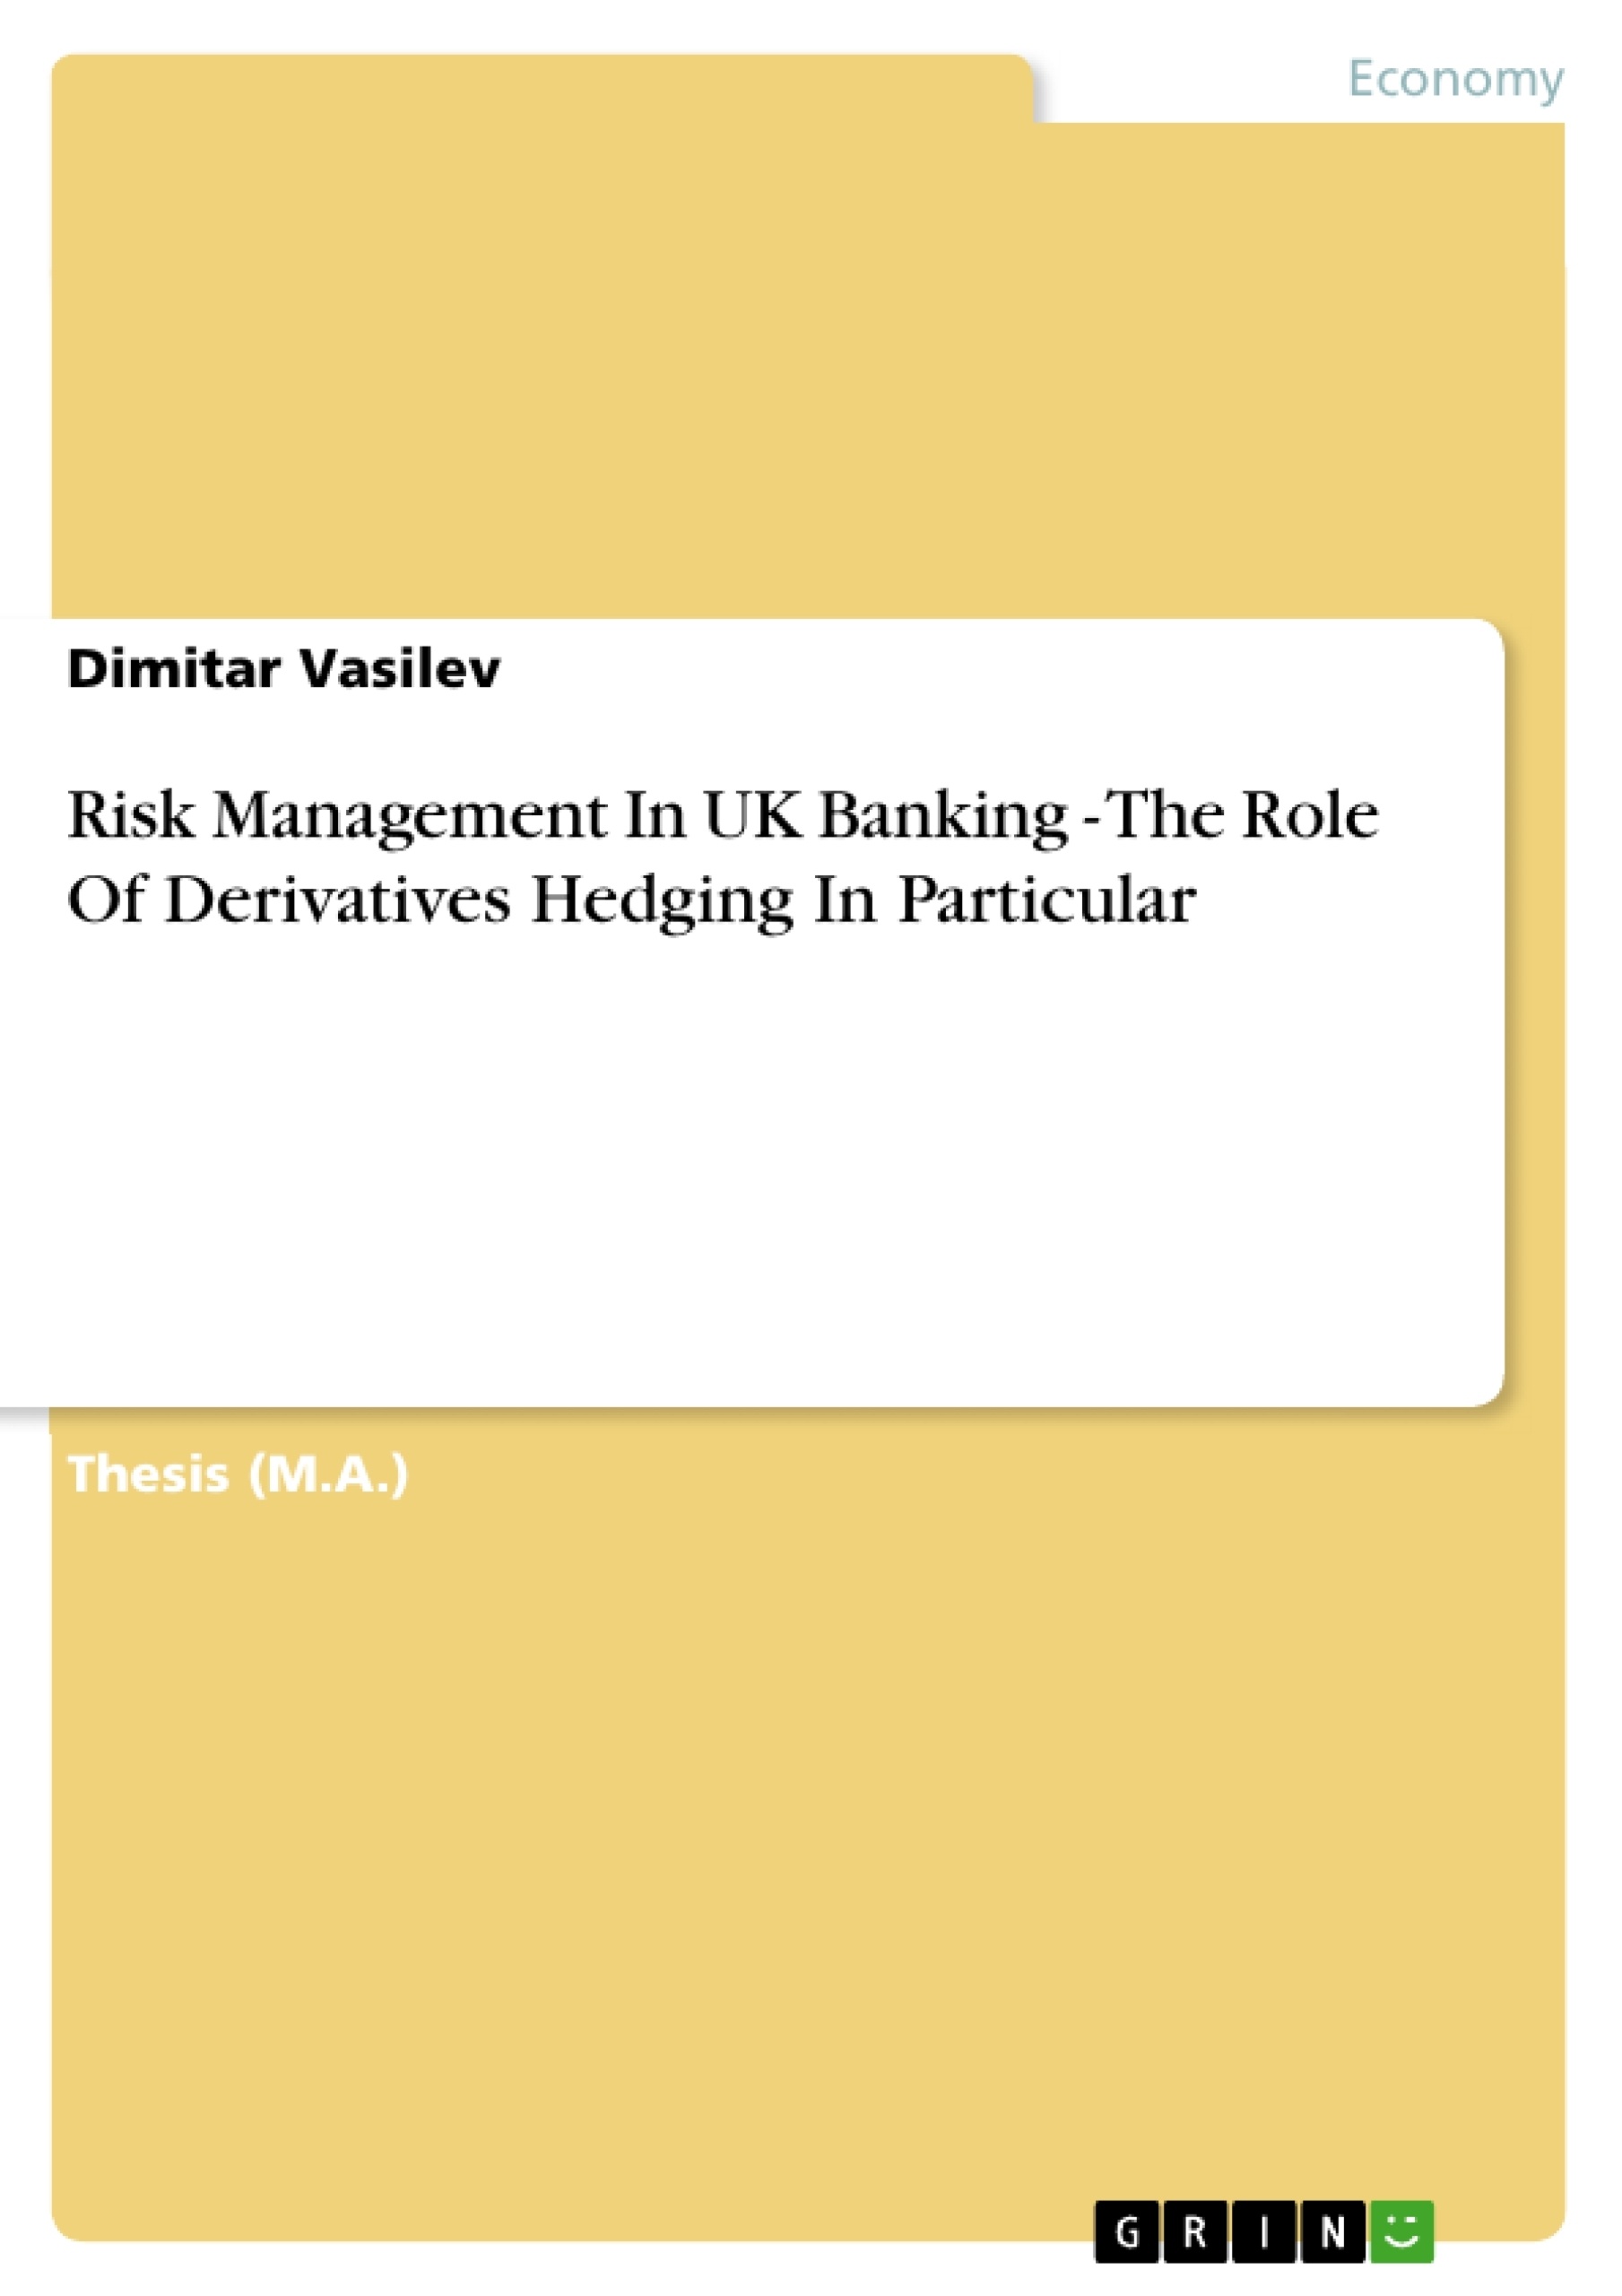 Title: Risk  Management In UK Banking - The Role Of Derivatives Hedging In Particular